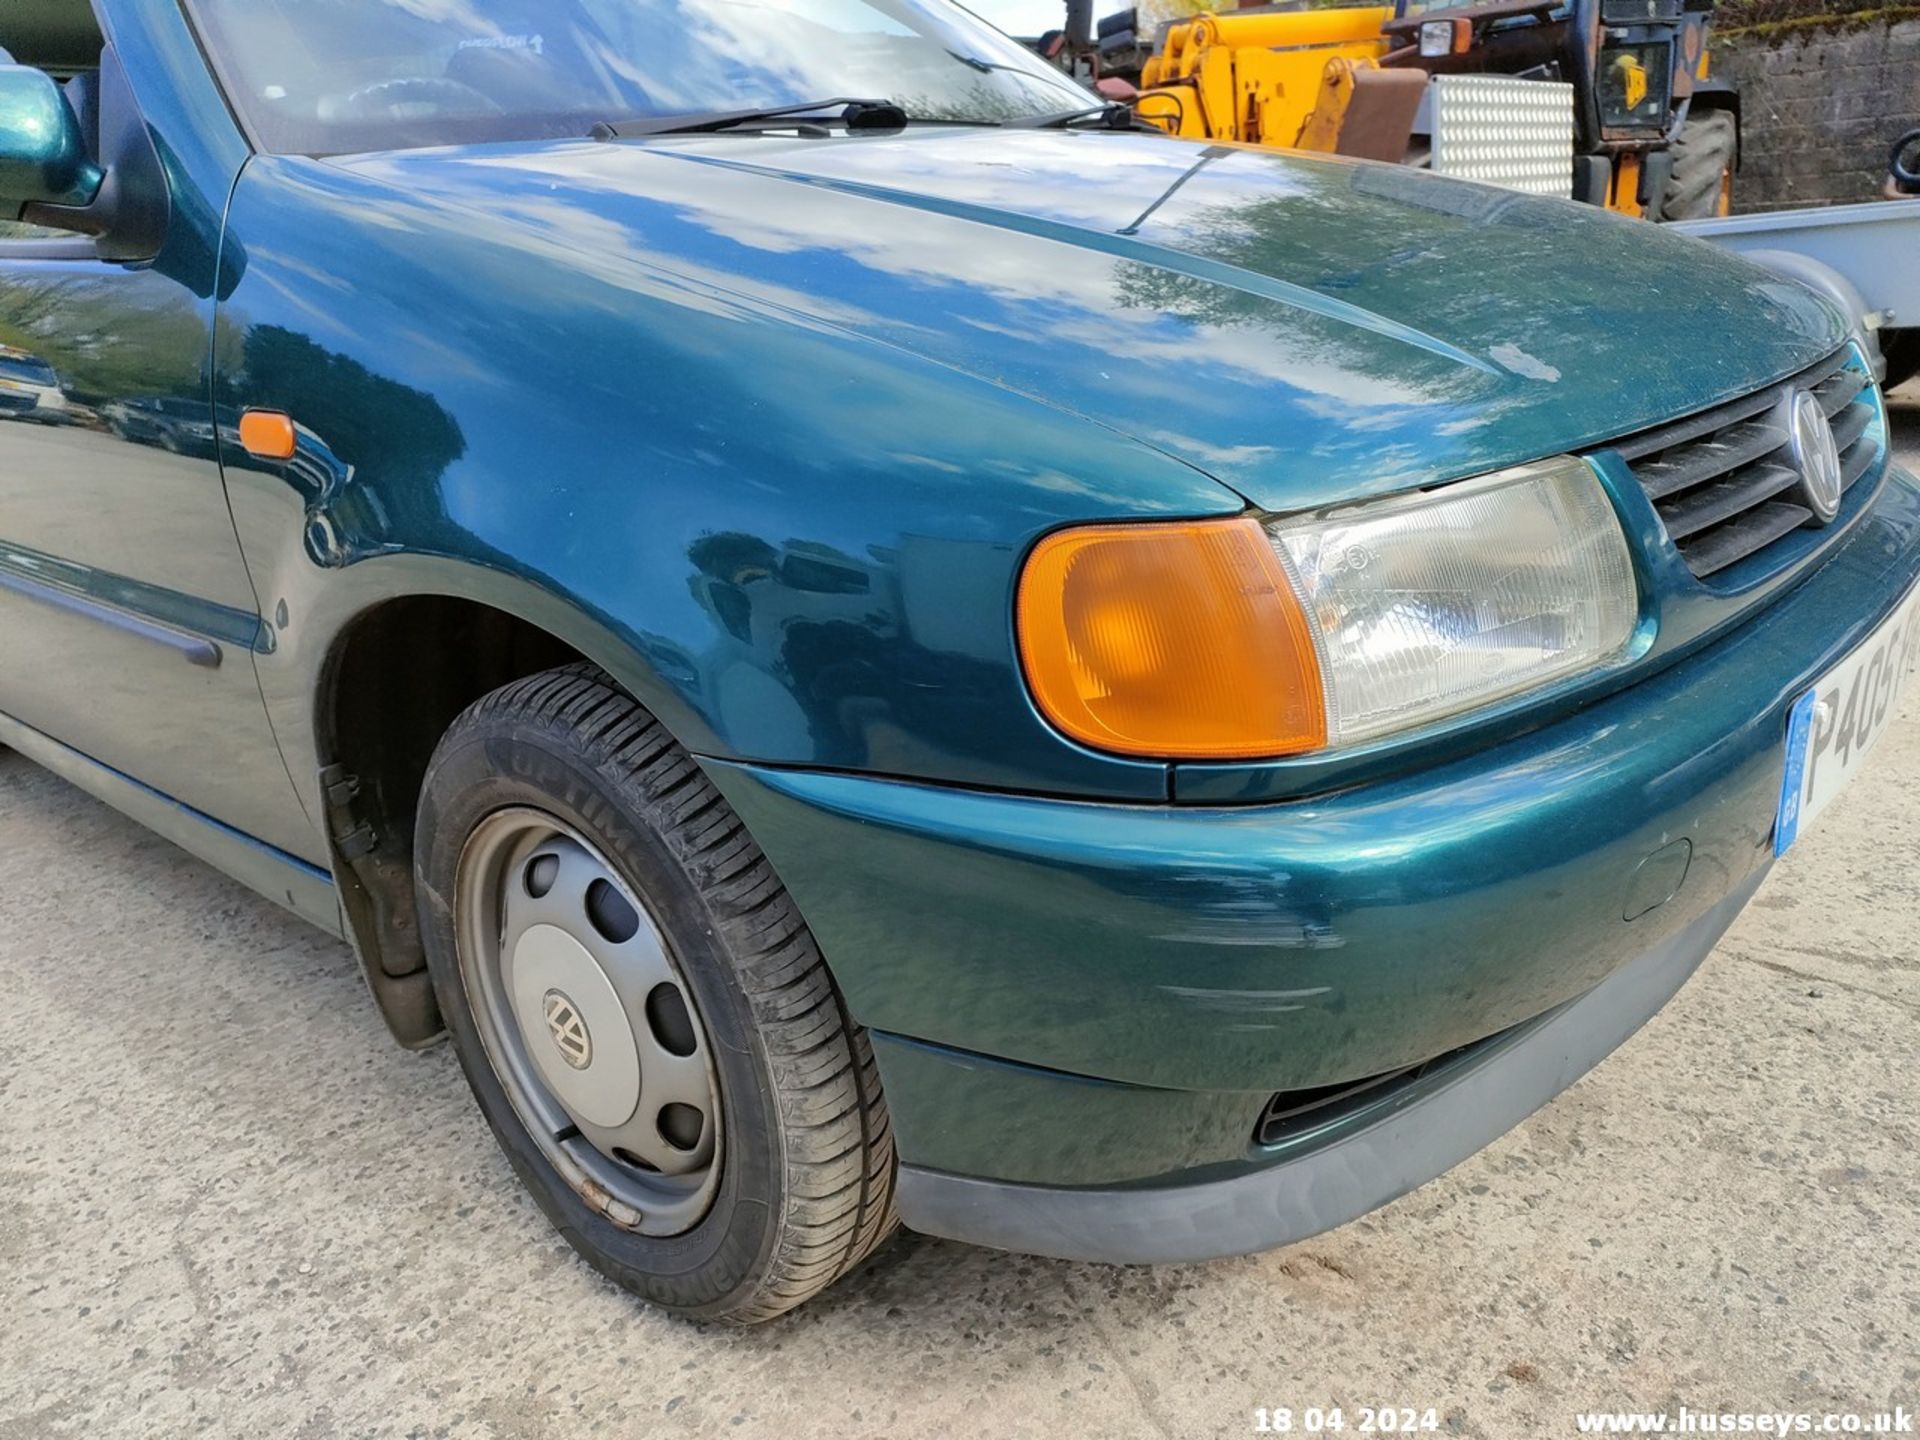 1997 VOLKSWAGEN POLO 1.4 CL AUTO - 1390cc 3dr Hatchback (Green, 68k) - Image 5 of 60